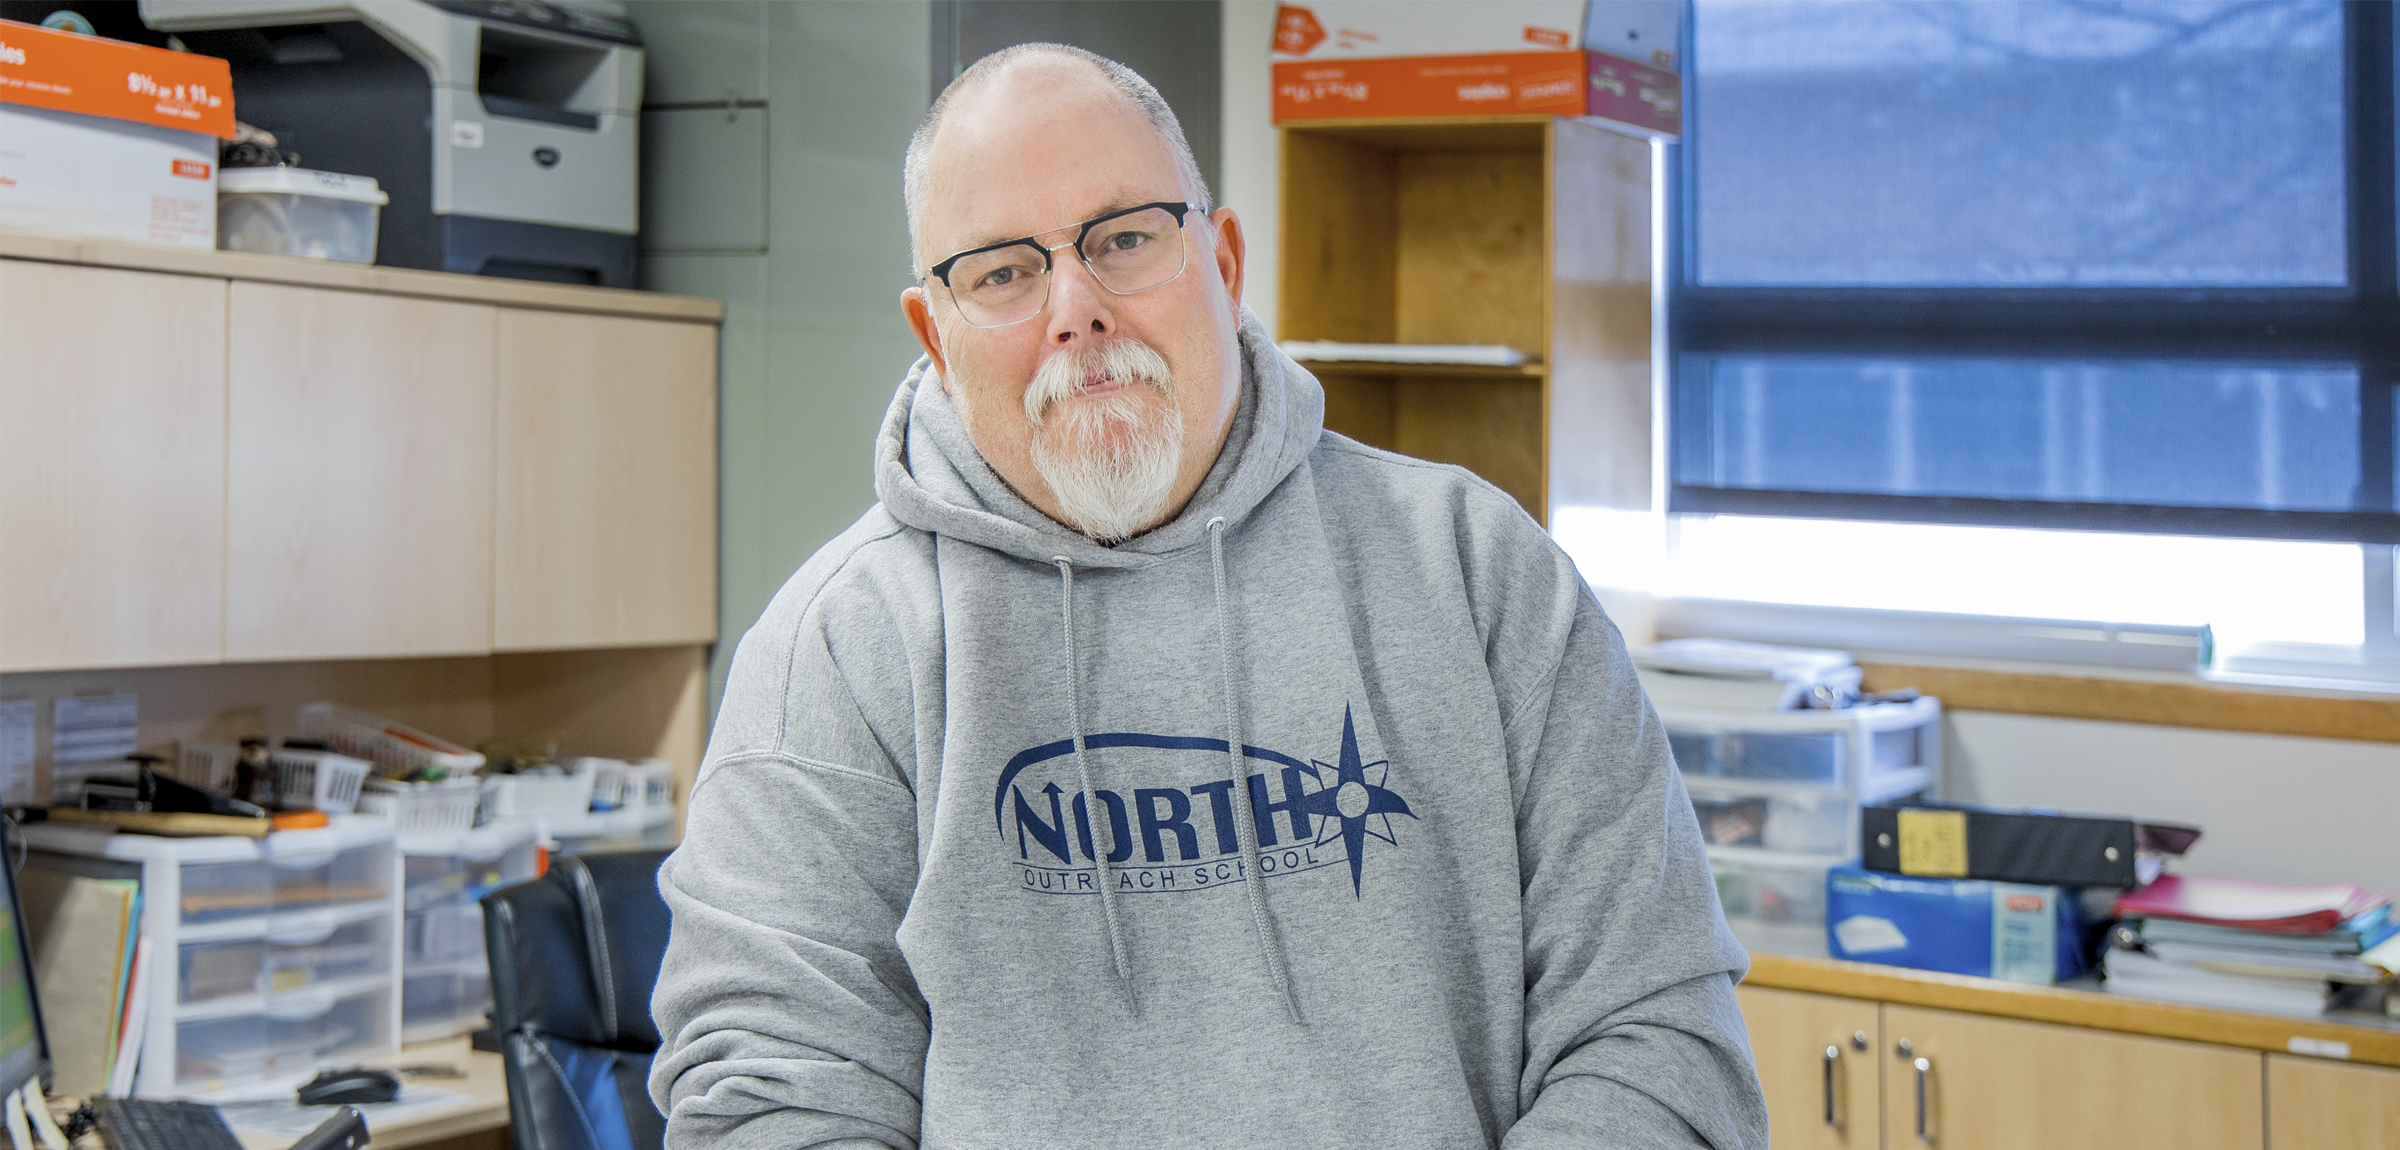 A man with short gray hair and glasses wearing a gray hoodie and sitting on a desk